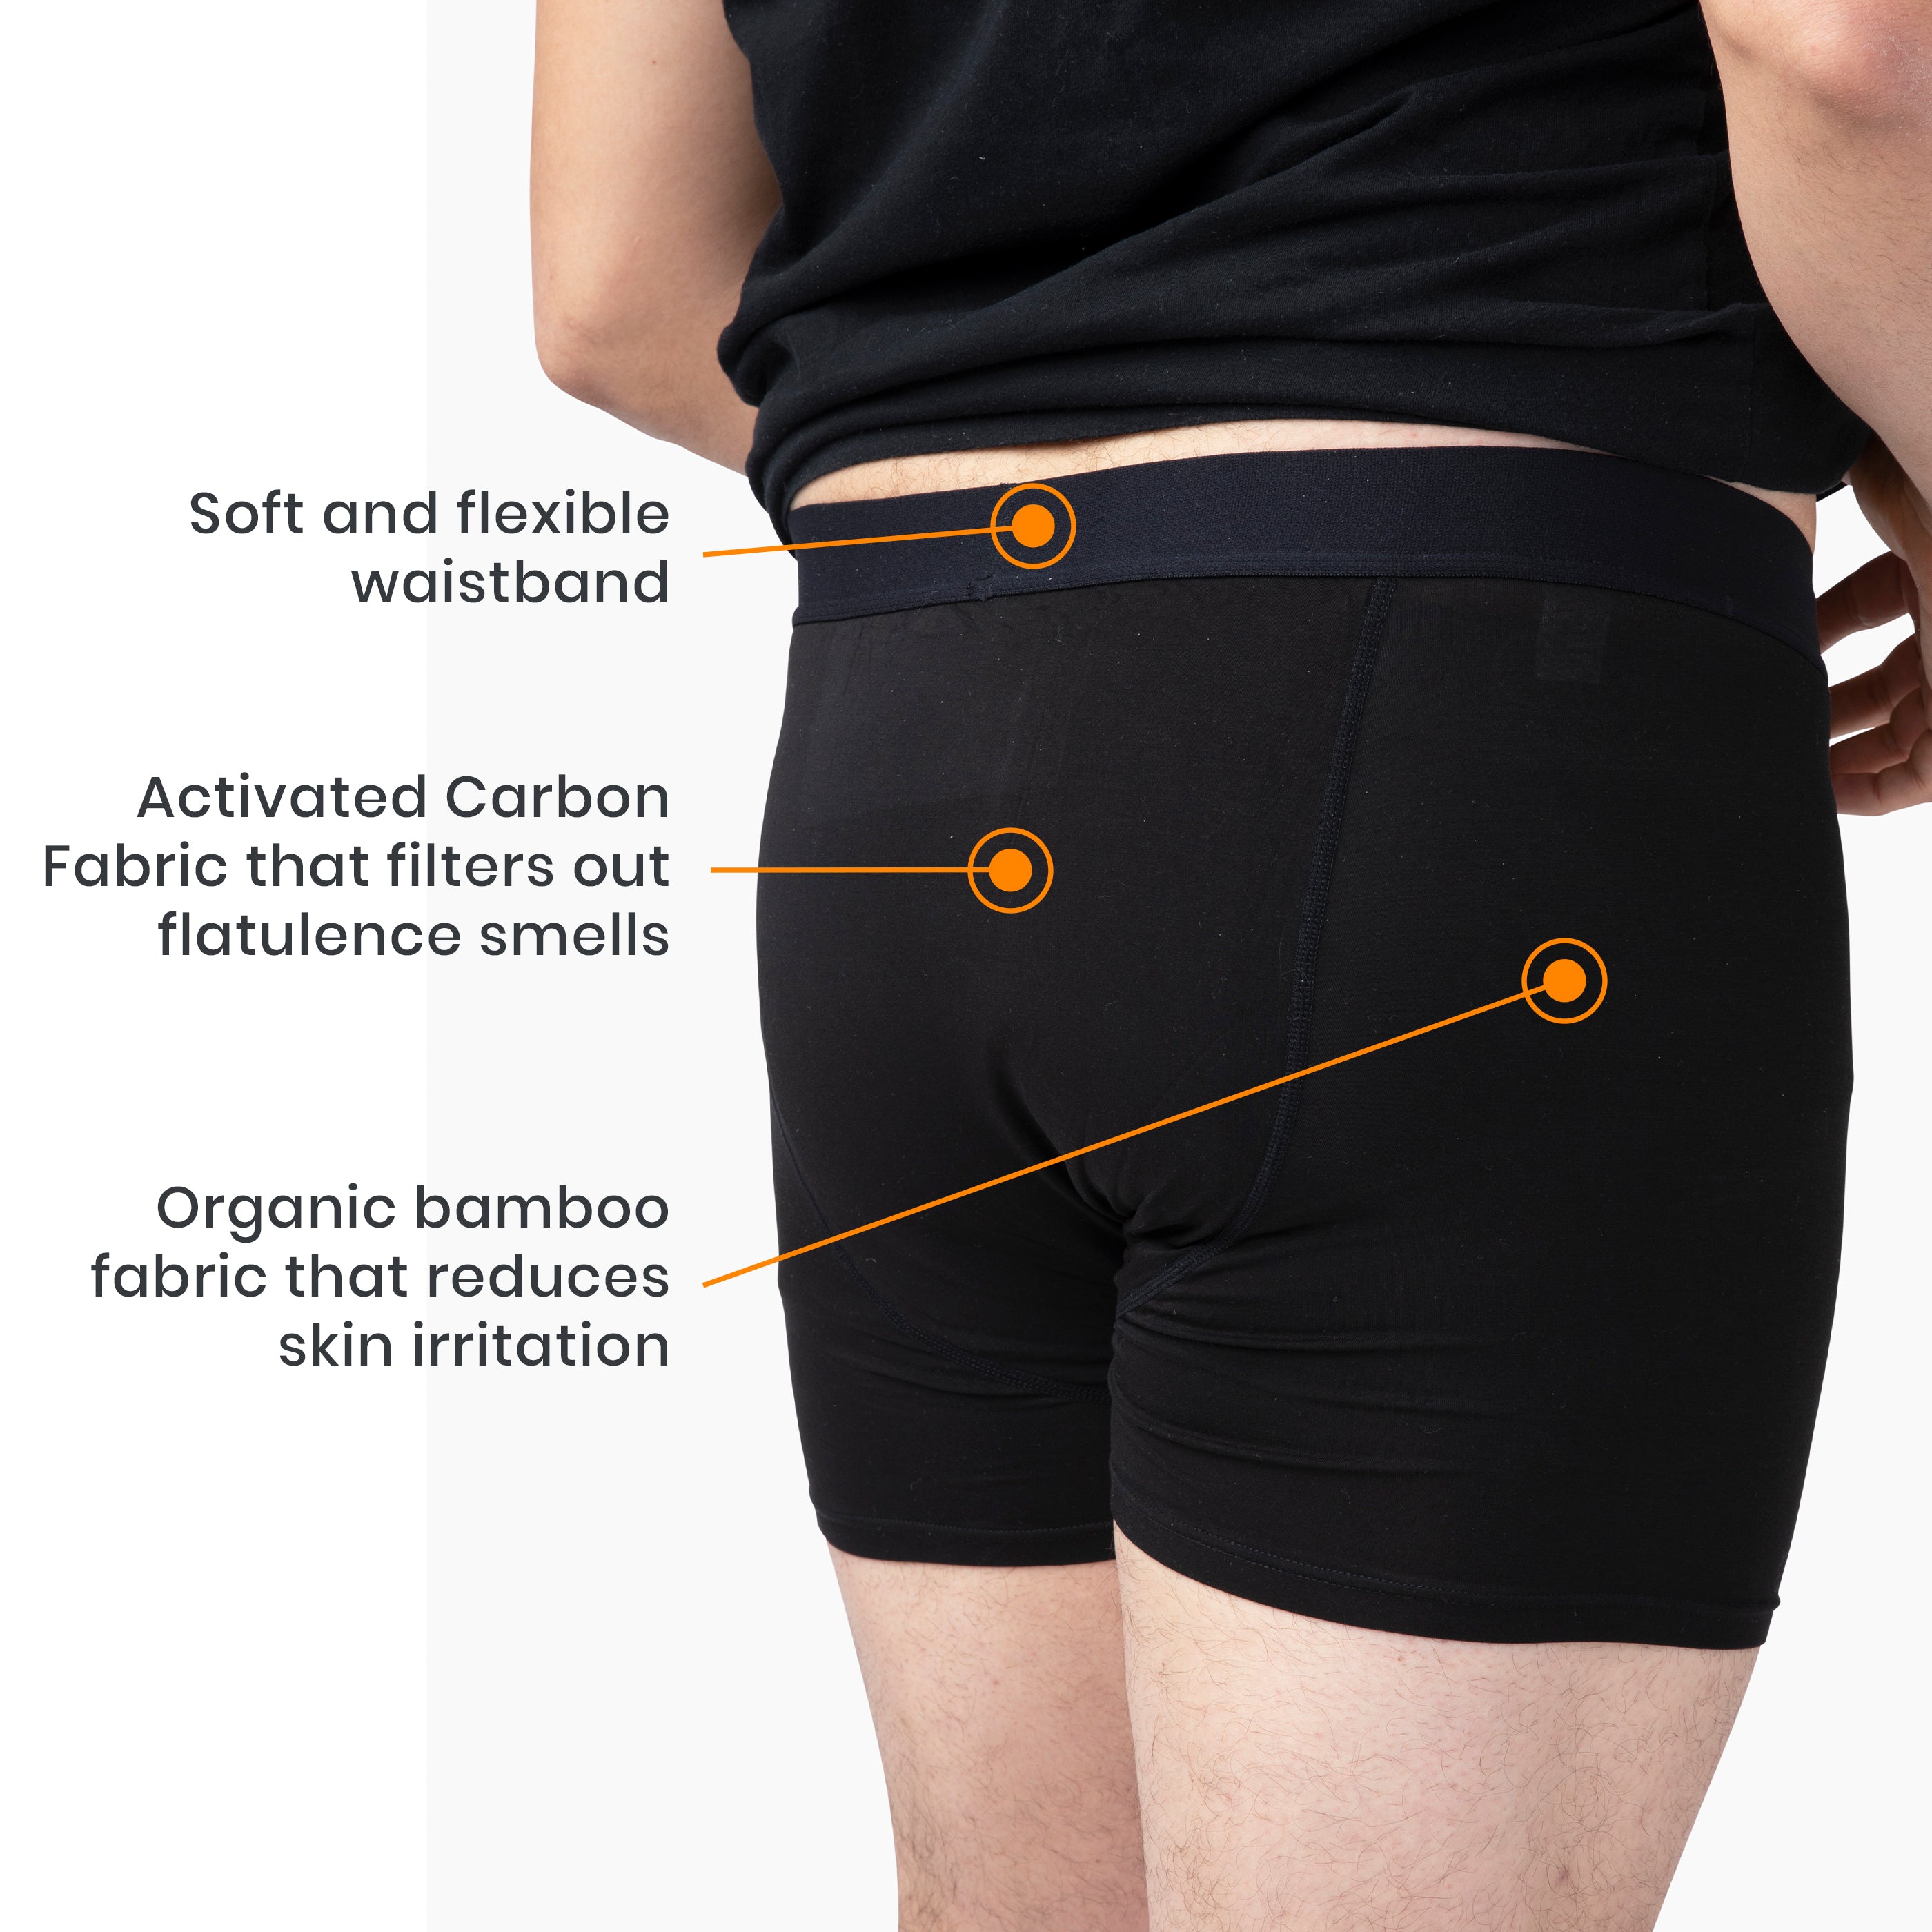 TOOTLES  Lab-Tested, Physician Founded, Fart Filtering Underpants